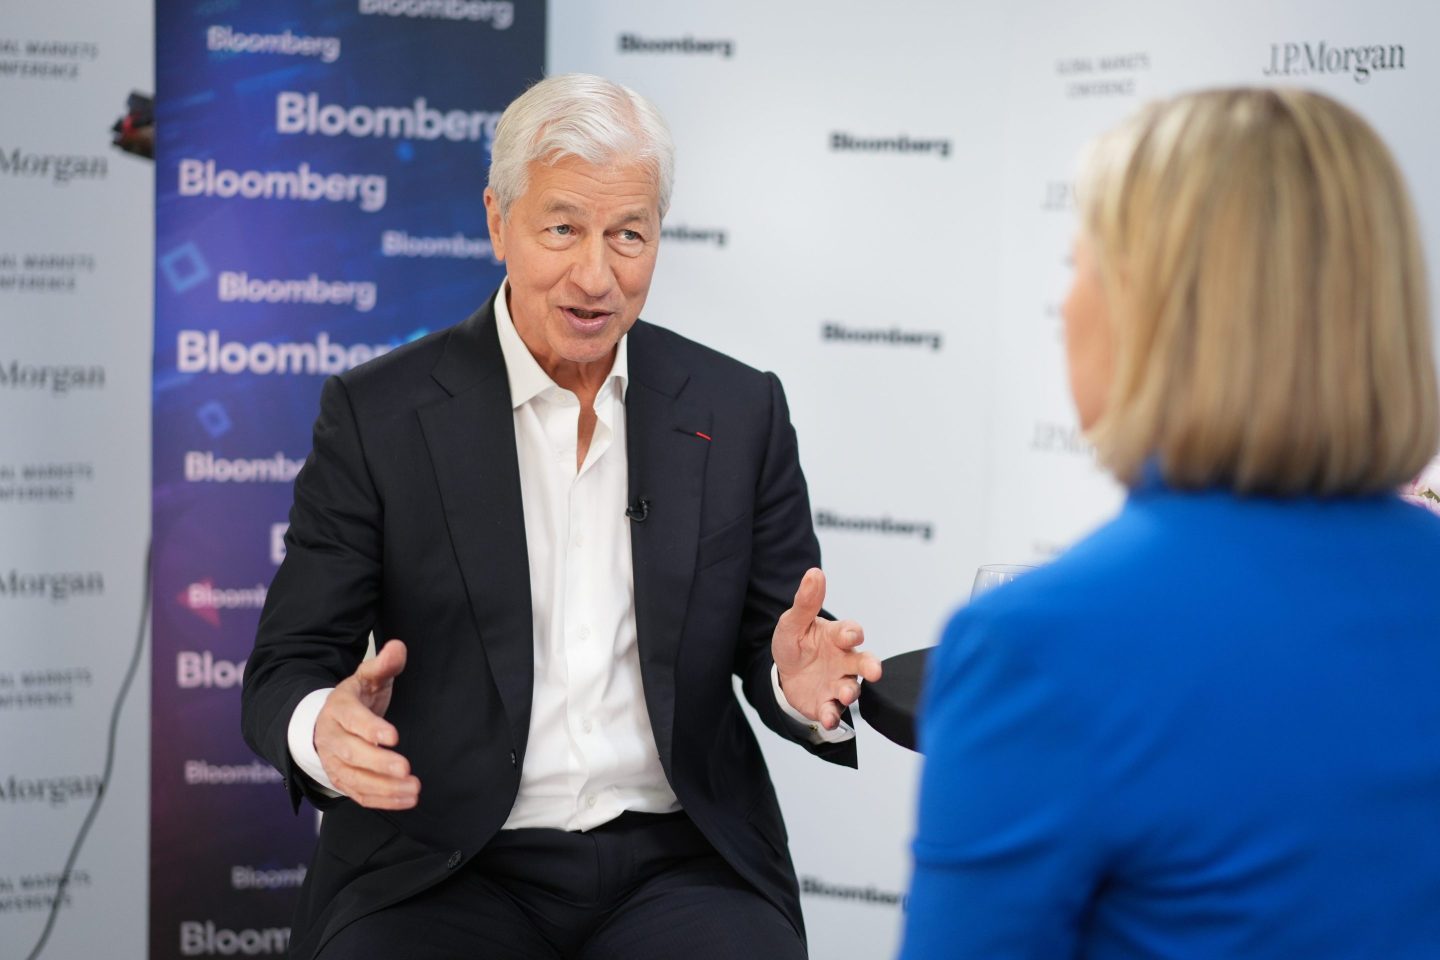 Jamie Dimon, chief executive officer of JPMorgan Chase &amp; Co., during a Bloomberg Television interview on the sidelines of the JPMorgan Global Markets Conference in Paris, France, on Thursday, May 16, 2024. Dimon said significant price pressures are still influencing the US economy and may mean interest rates will be higher for longer than many investors are expecting. Photographer: Nathan Laine/Bloomberg via Getty Images